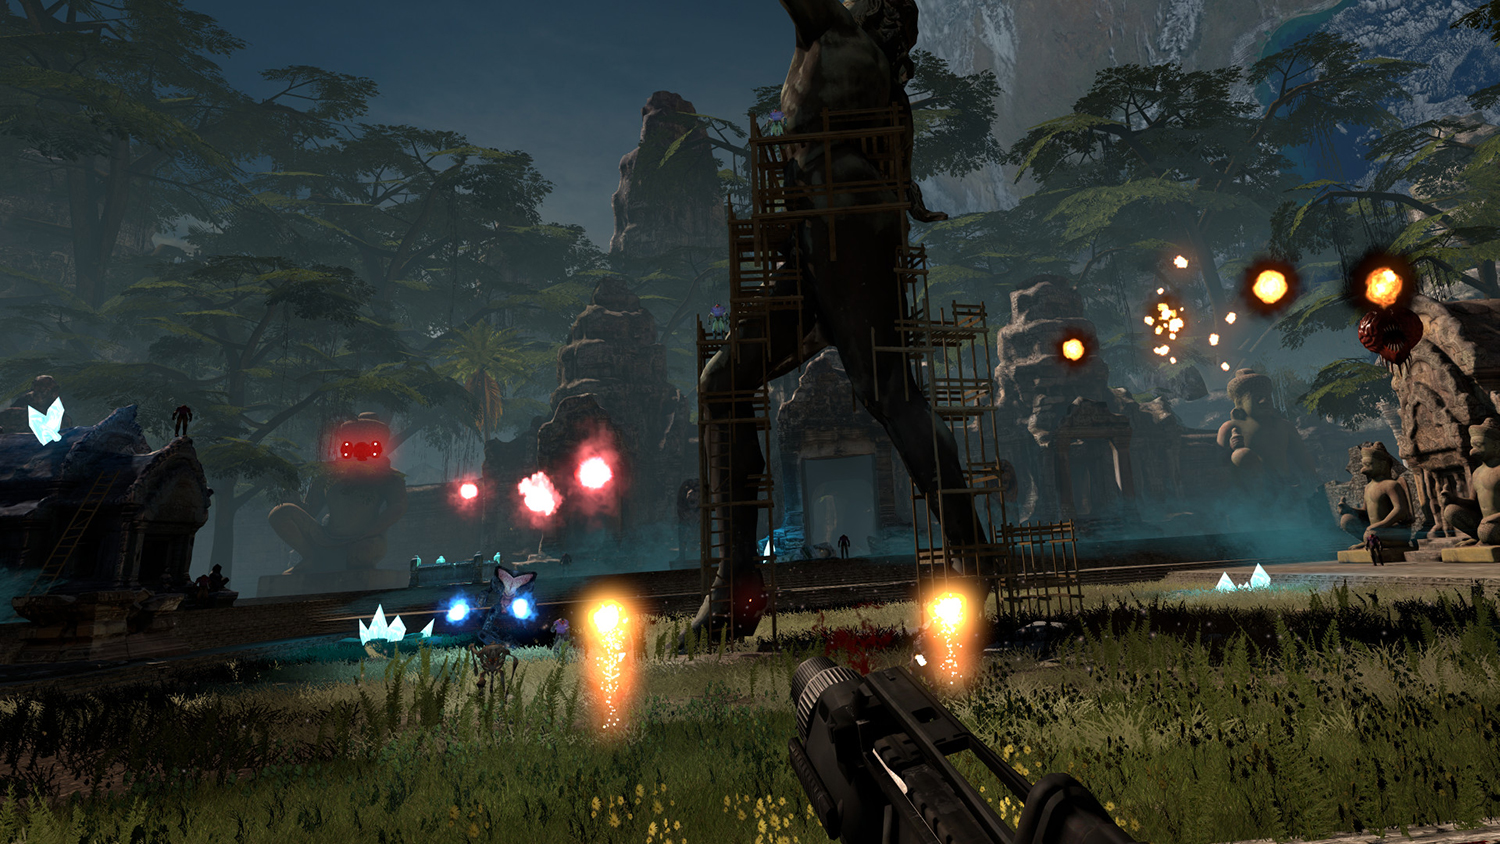 serious sam vr brings frantic fps action to oculus htc vive the last hope 0001